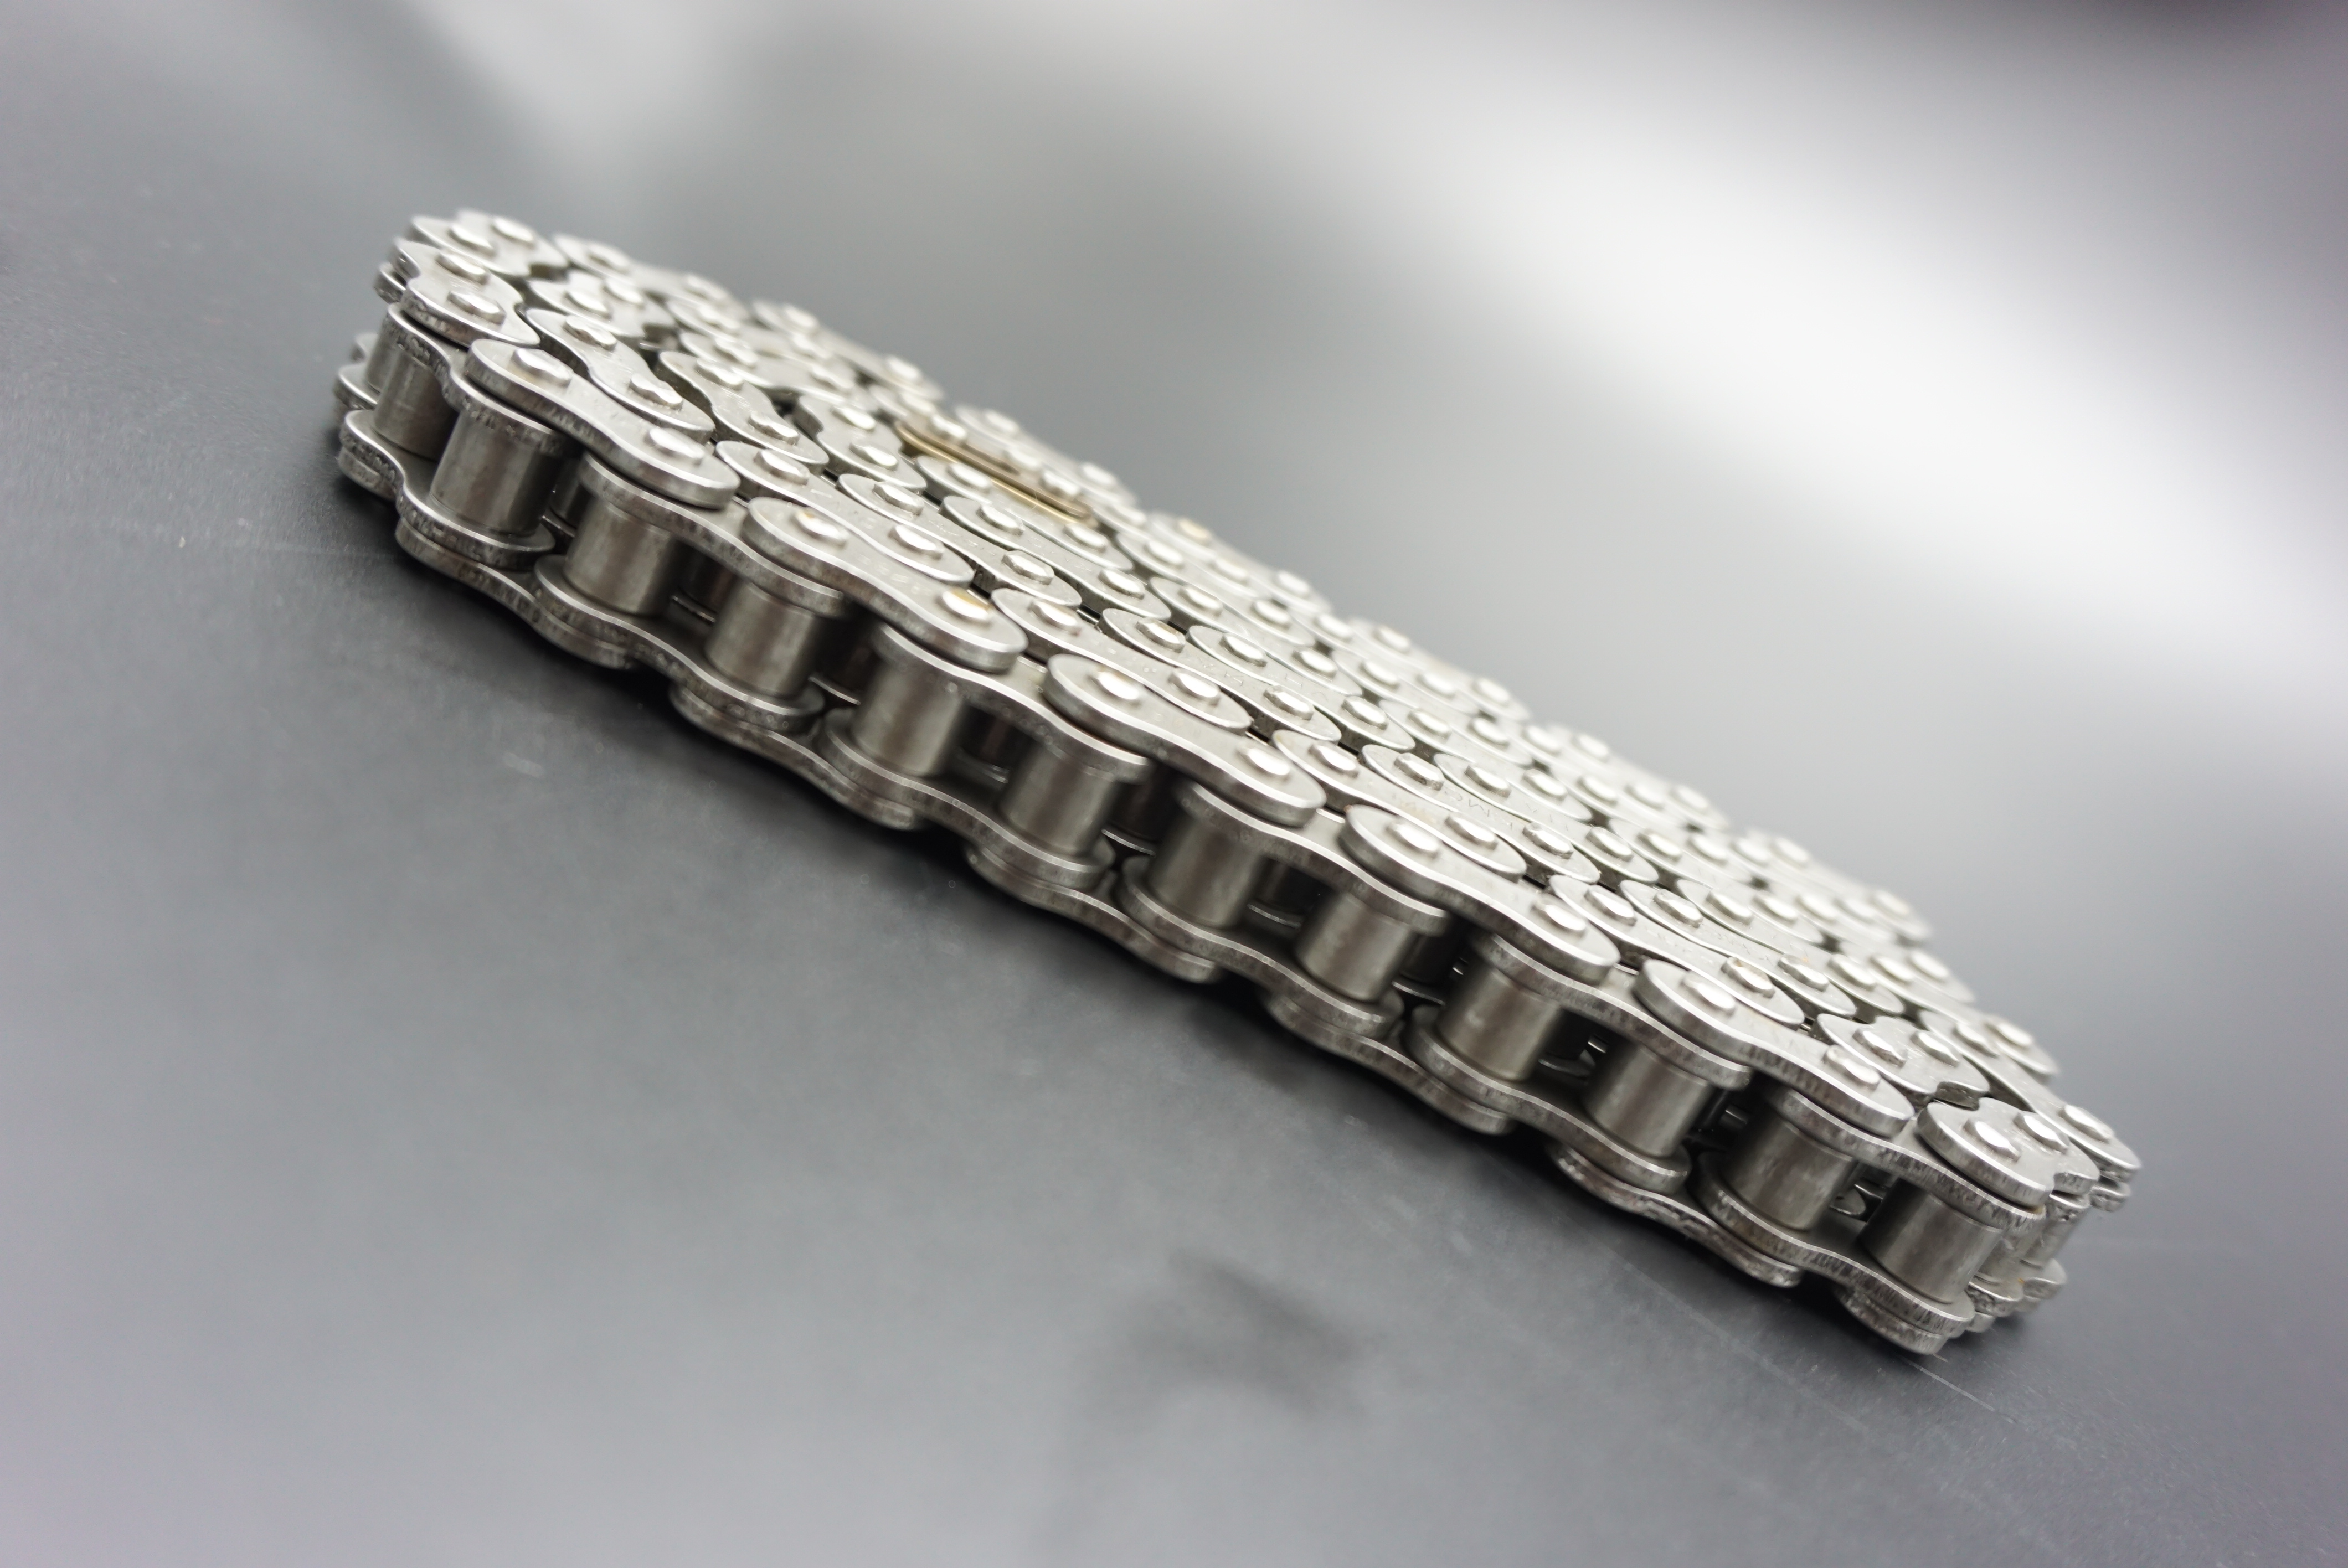 How to install a bicycle chain?